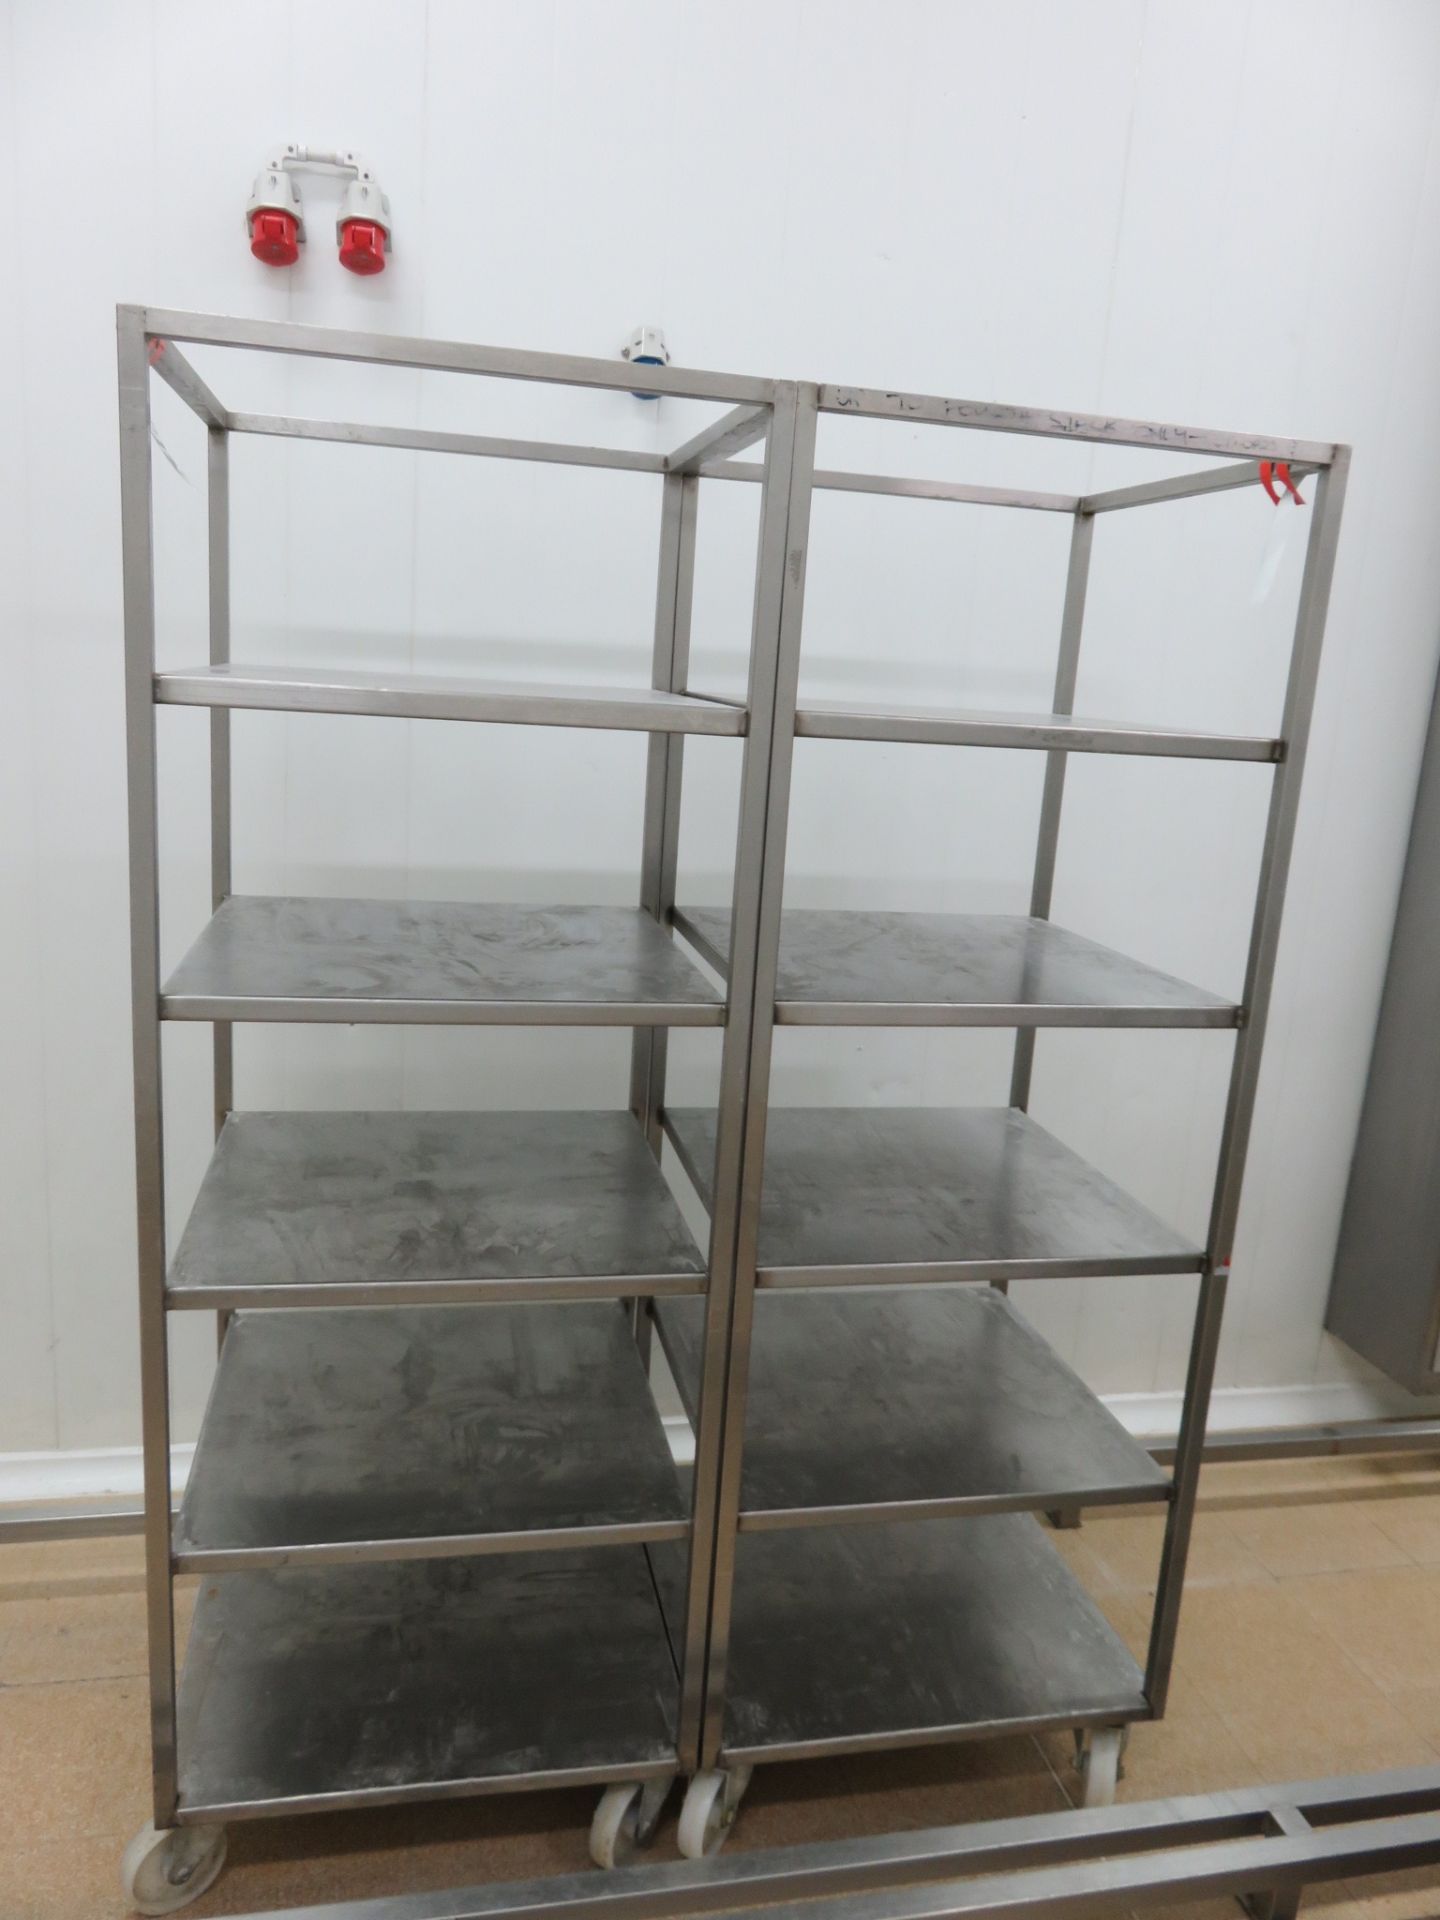 2 x S/s mobile trollies with 5 shelves. Approx. 600mm x 600mm x 1800mm high. Lift Out £10